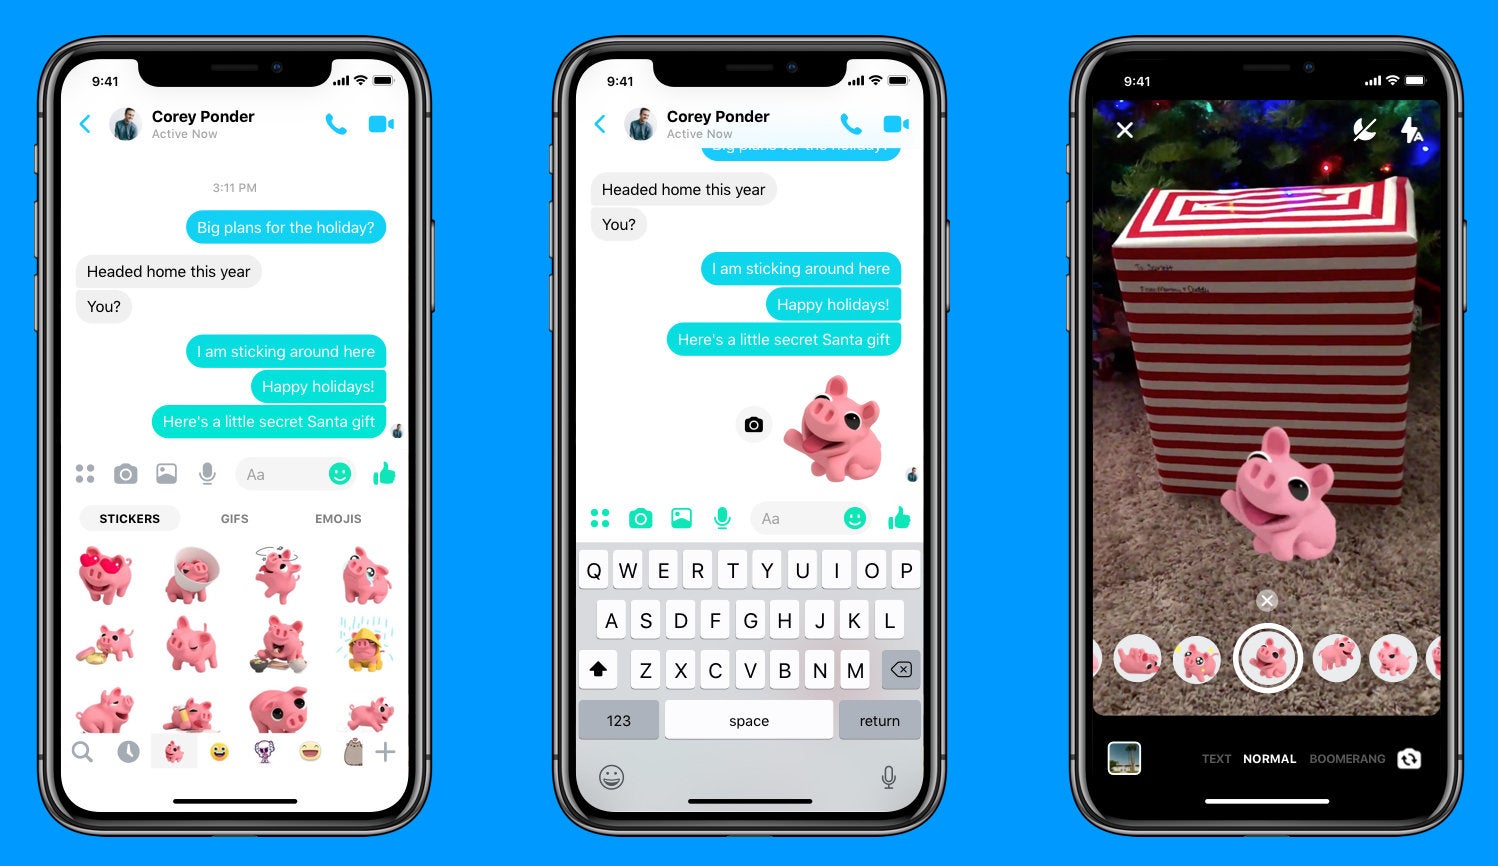 Facebook Messenger update introduces new selfie mode and AR stickers